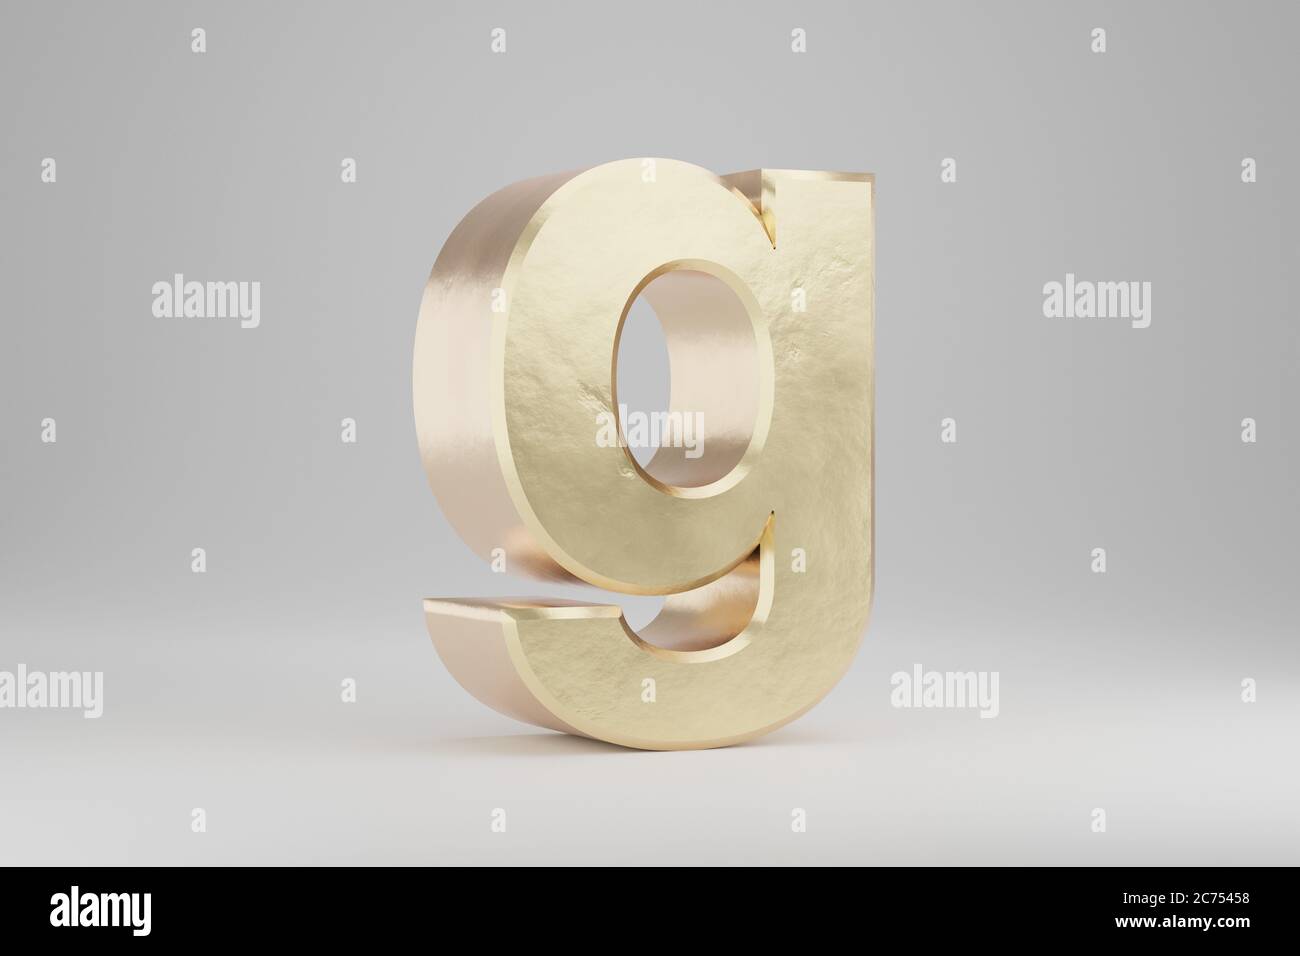 Gold 3d letter G lowercase. Golden letter isolated on white background. Golden alphabet with imperfections. 3d rendered font character. Stock Photo